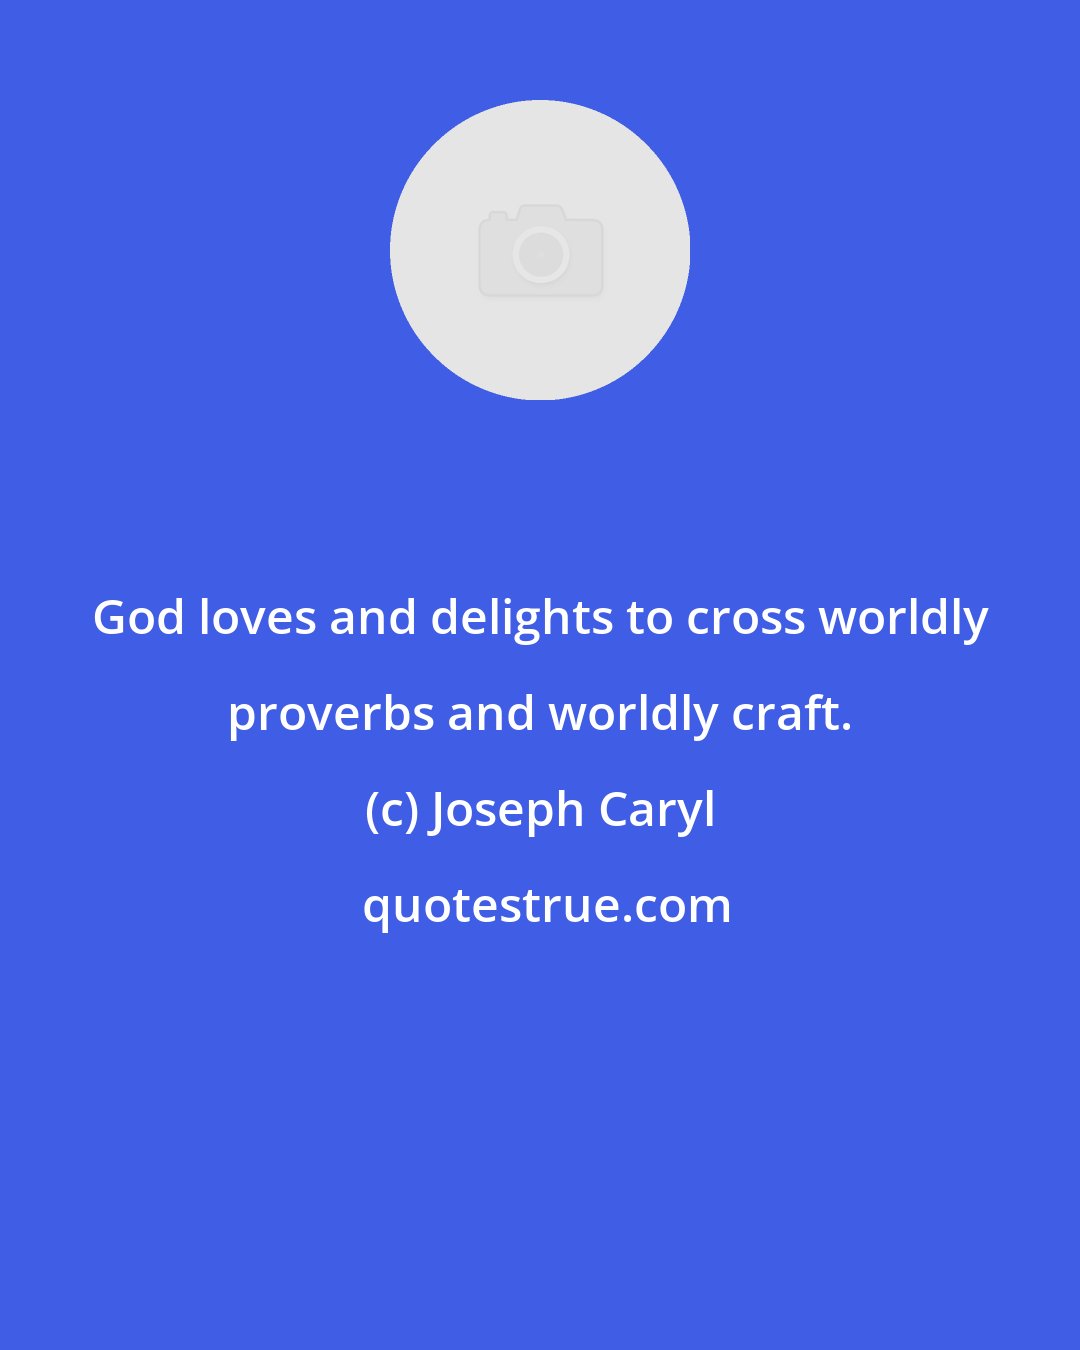 Joseph Caryl: God loves and delights to cross worldly proverbs and worldly craft.